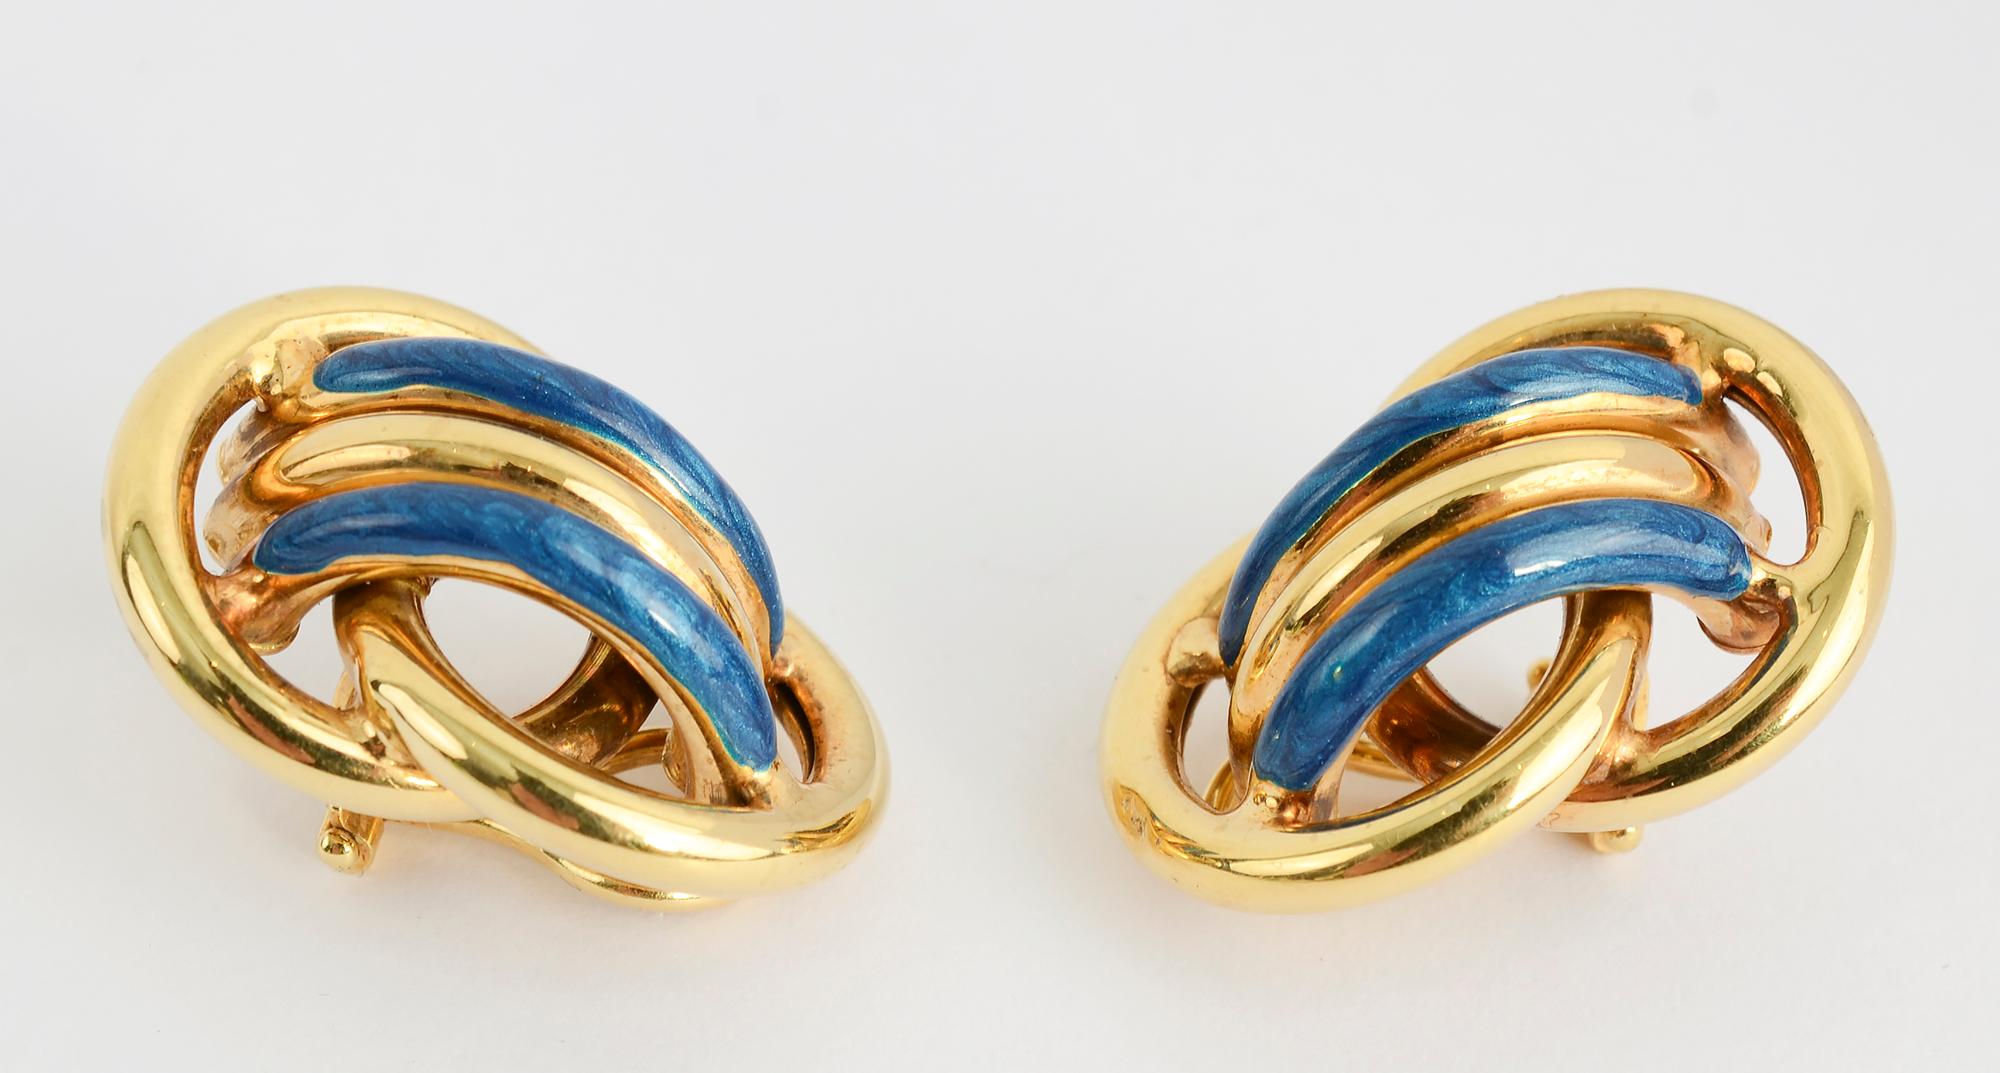 Chic and sporty gold earrings with enamel in a beautiful shade of blue.
The earrings consist of two overlapping gold circles over which are three bands of half hoops. The earrings are 1 1/16 inches in length.
Clip backs can be converted to